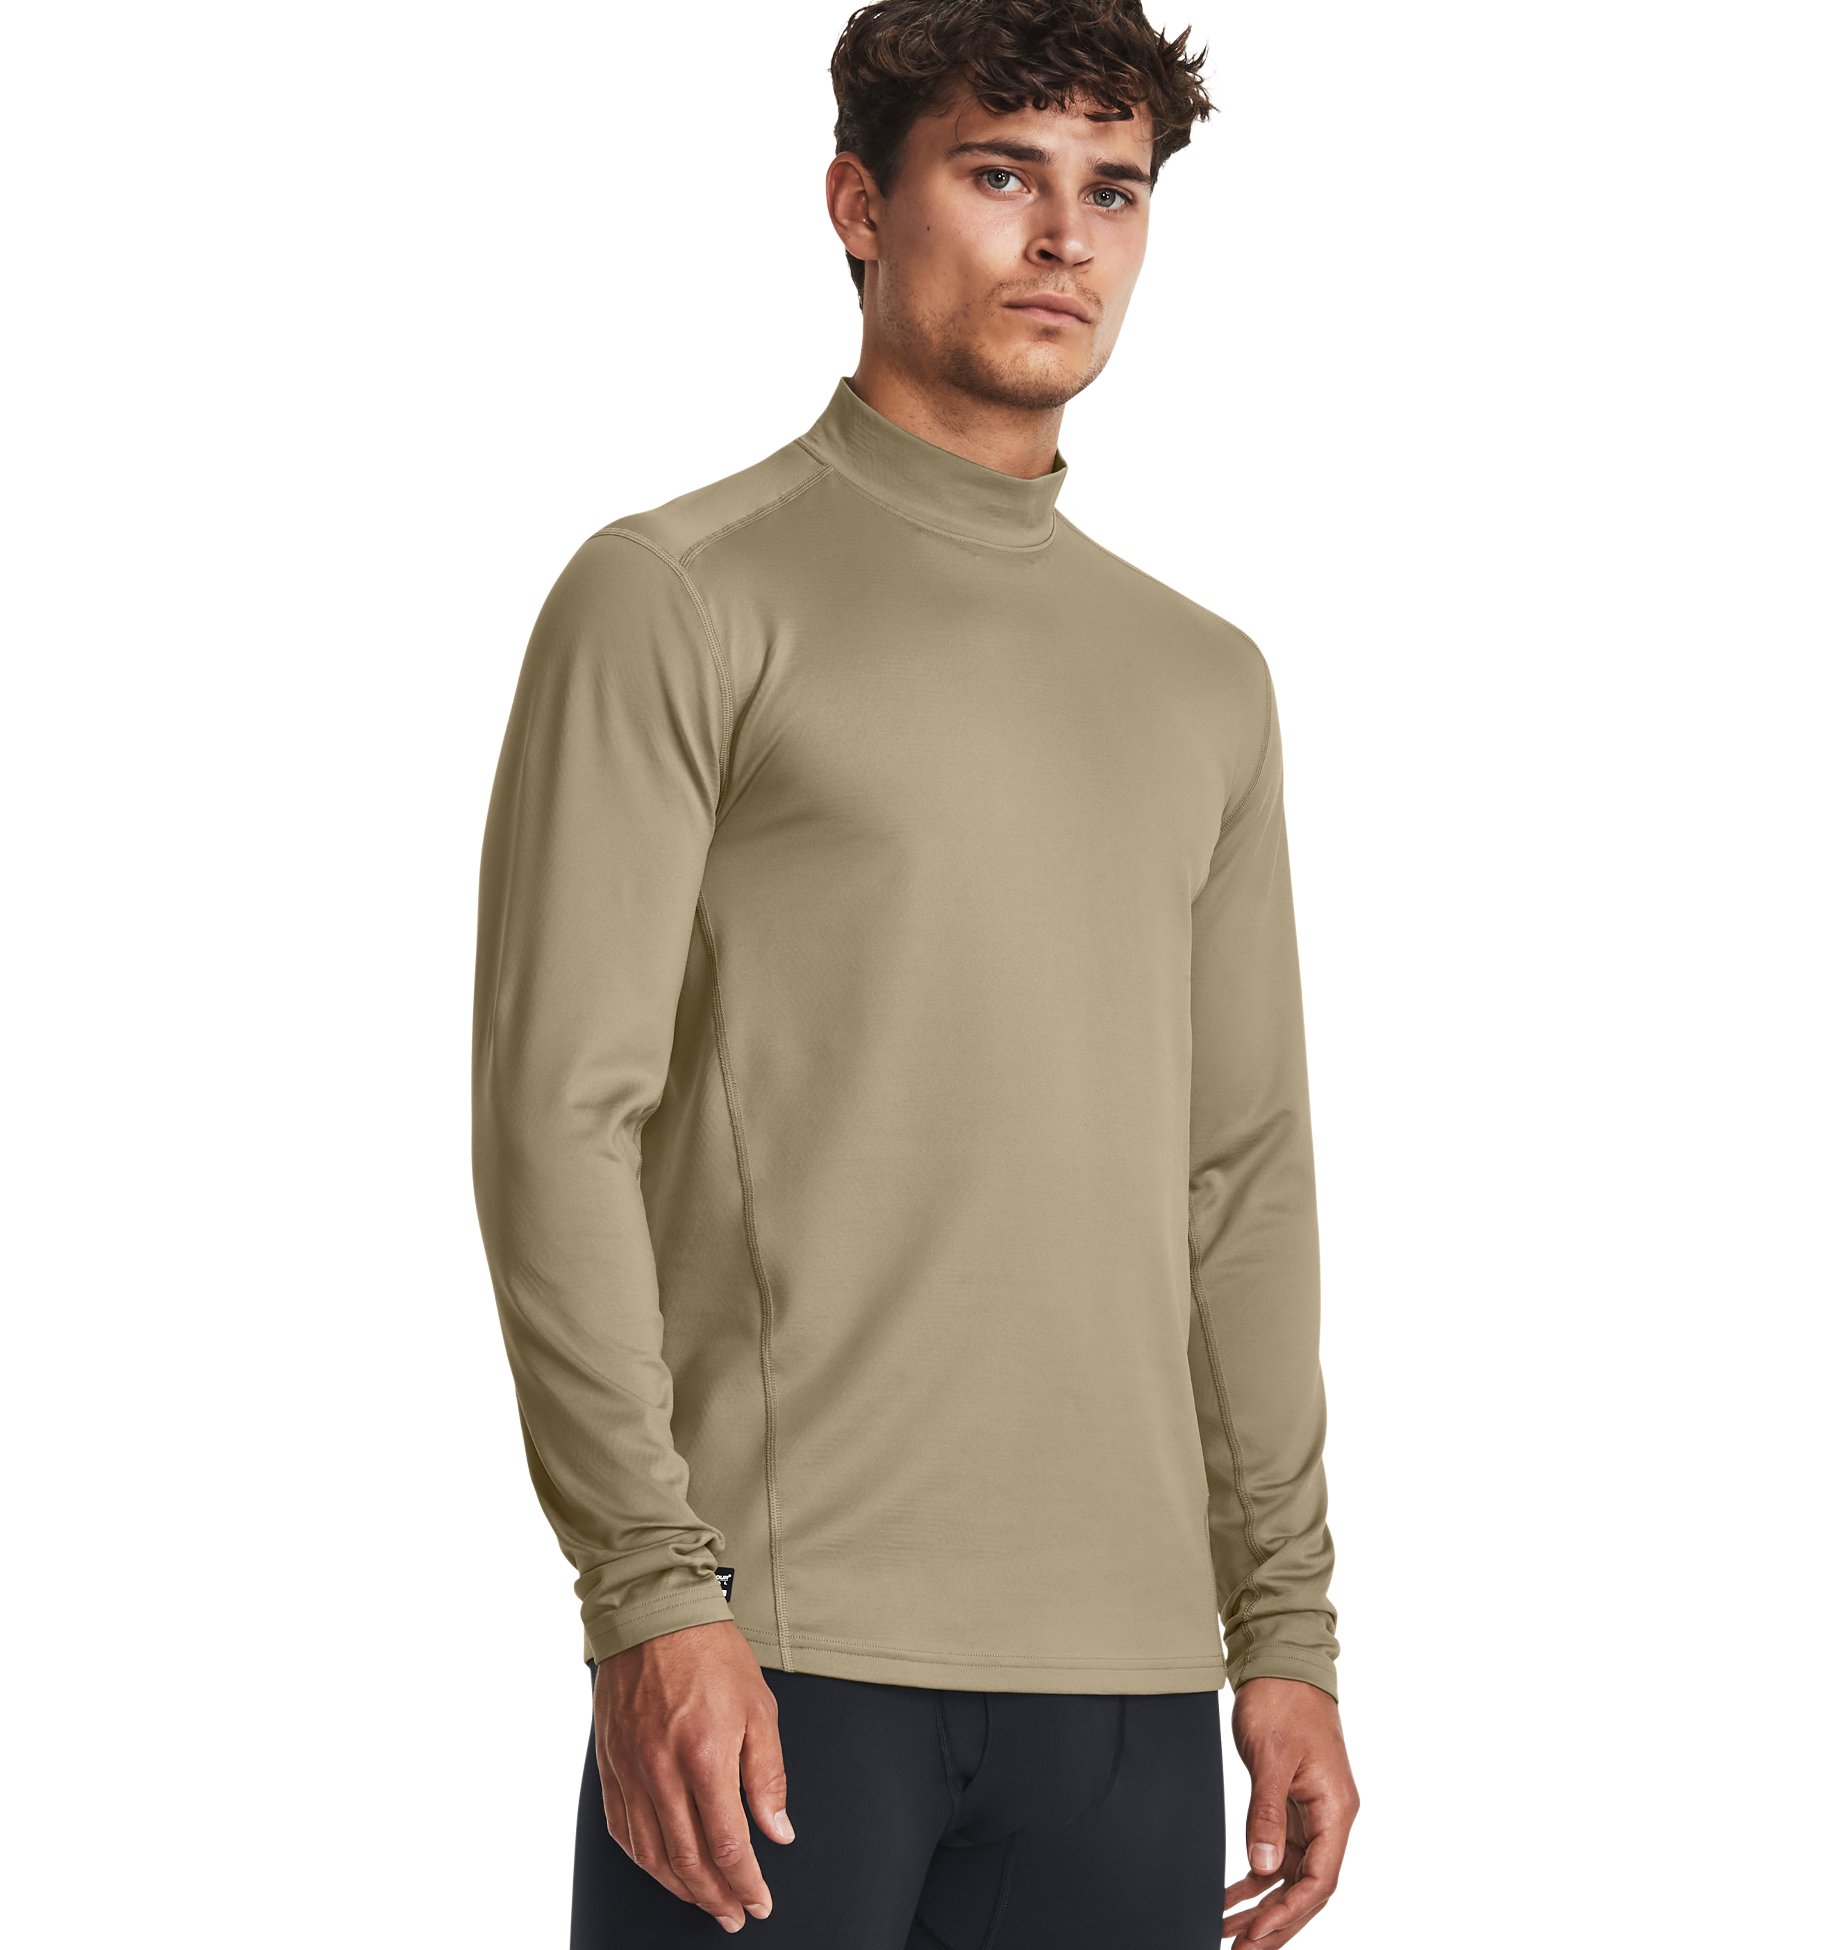 https://cs1.0ps.us/original/opplanet-under-armour-tactical-coldgear-infrared-base-mock-mens-federal-tan-extra-large-1365388499xl-main